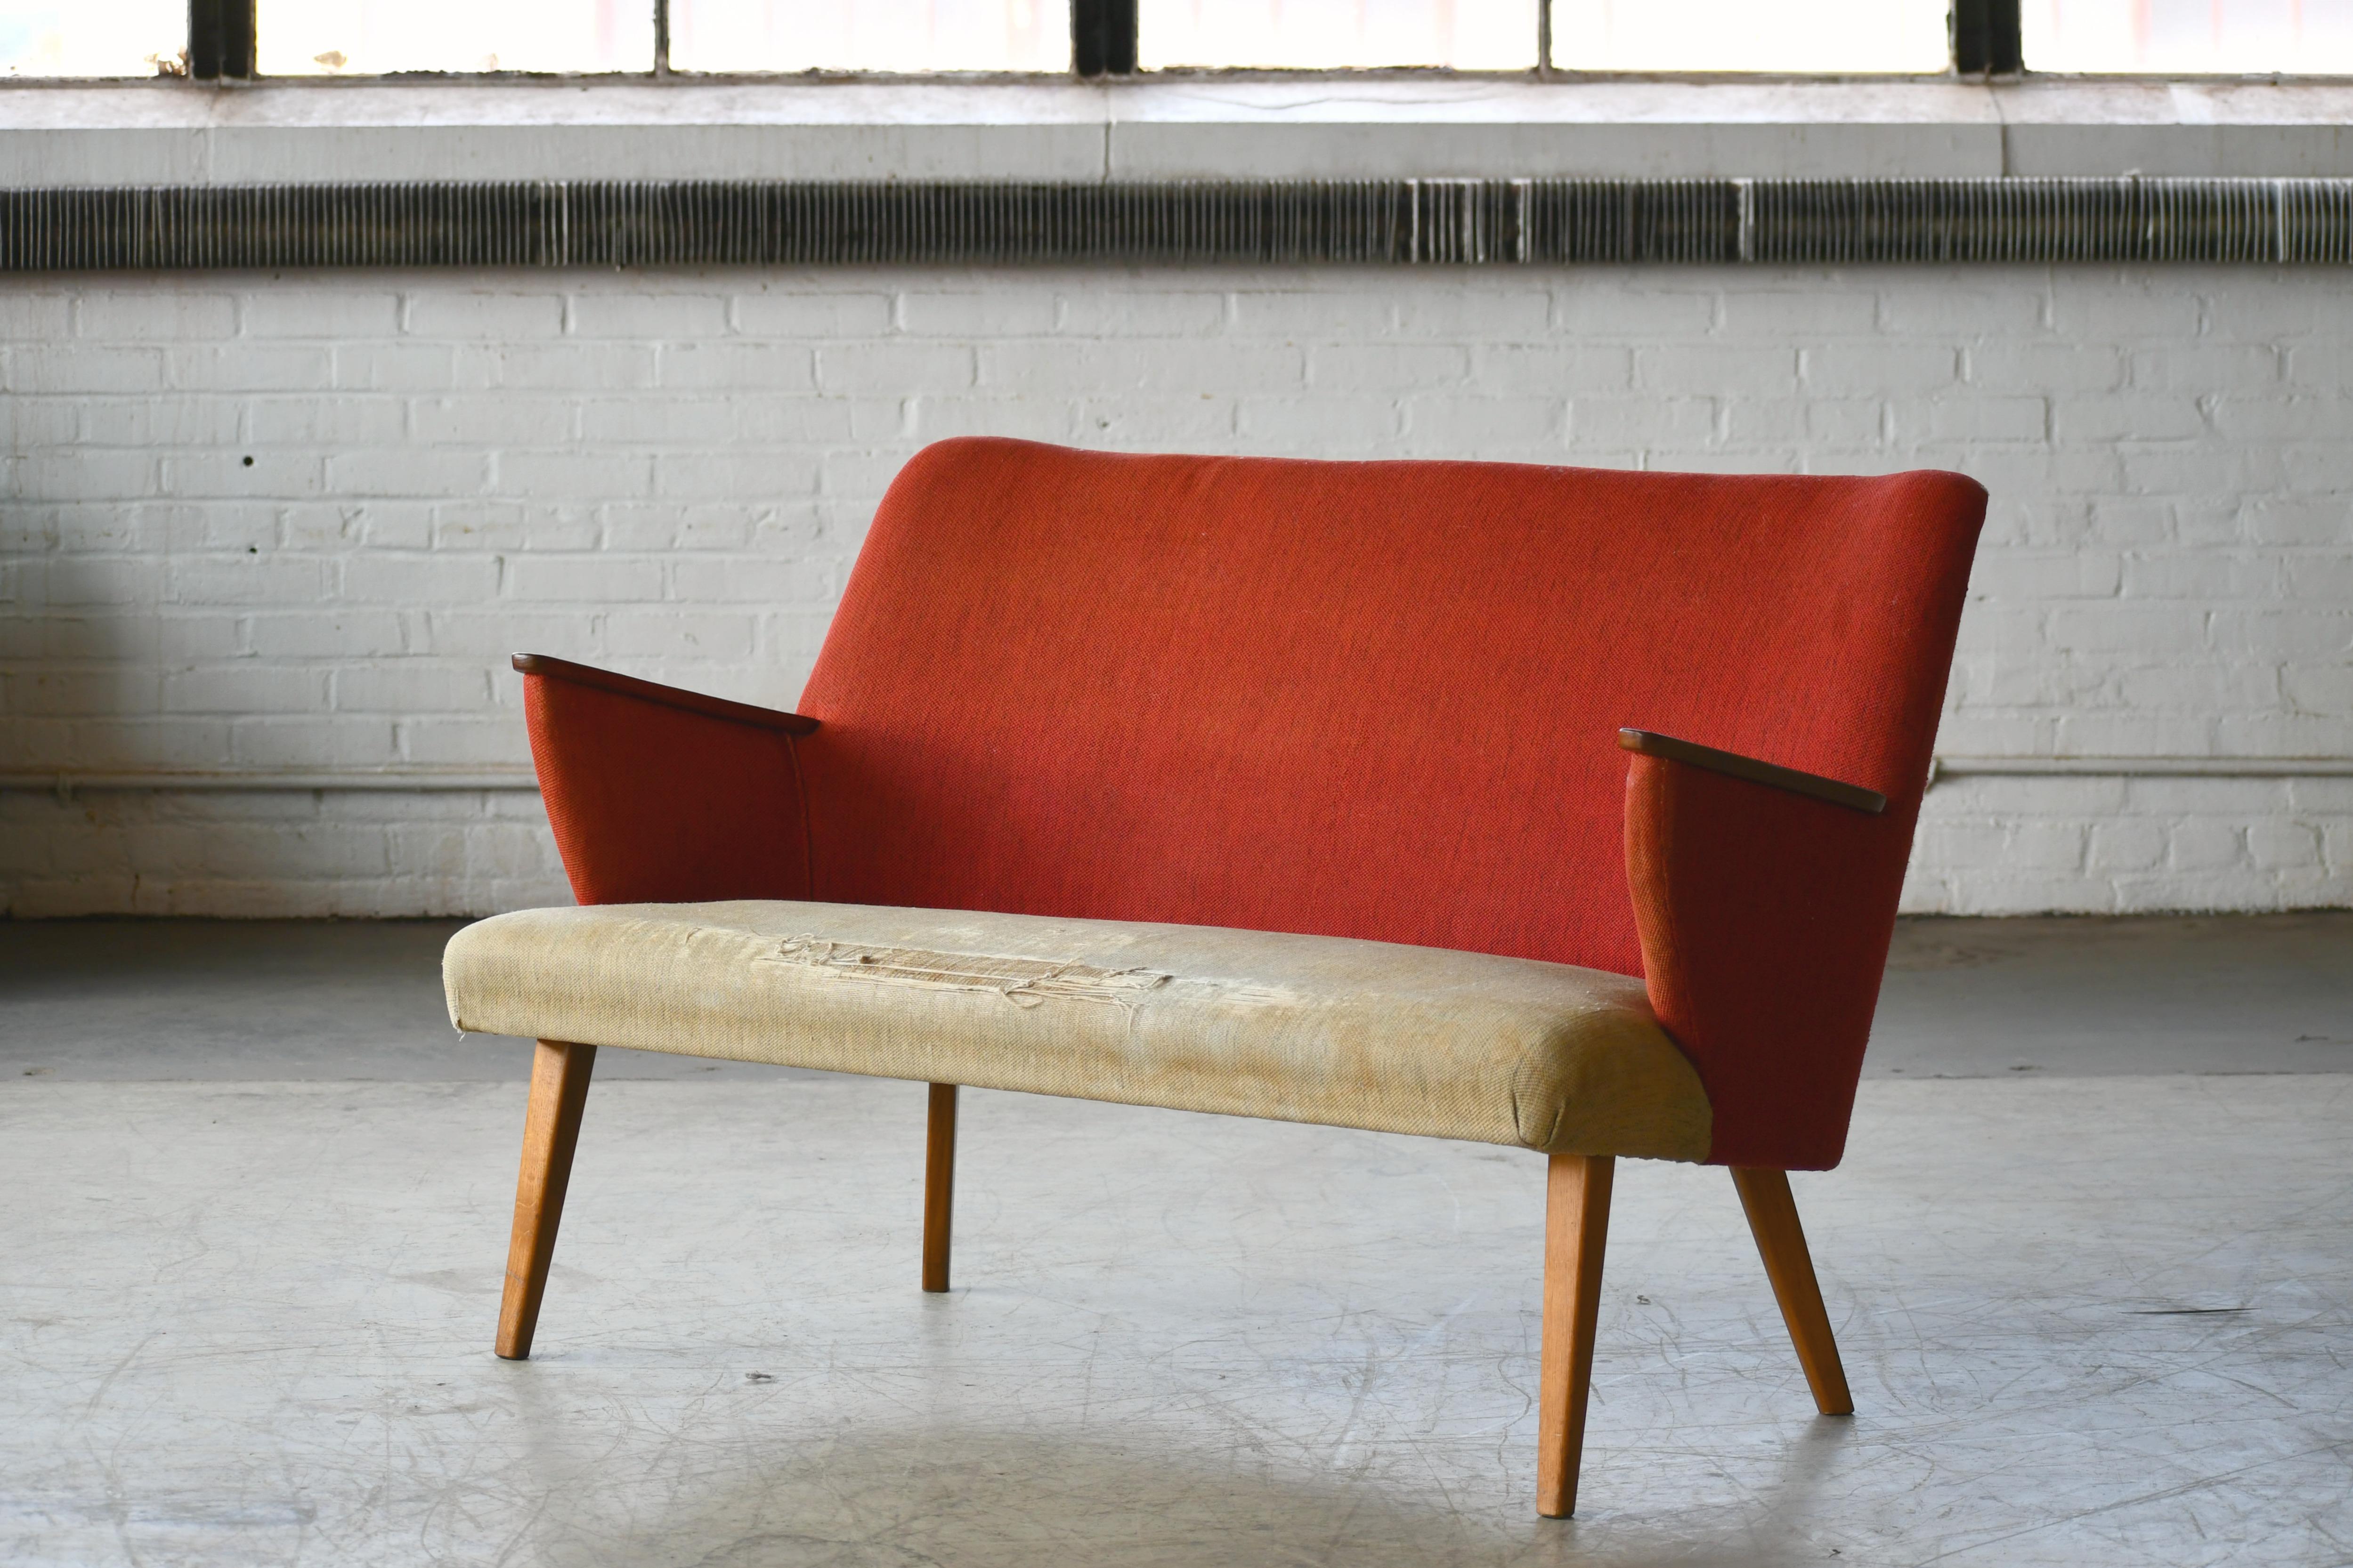 Classic and very elegant lines very much in the style of the early Danish iconic designers/makers, Frits Henningsen made circa late 1940s-1950s. Back and seat nice and firm and frame on Cuban mahogany legs remains sturdy. The sofa has been